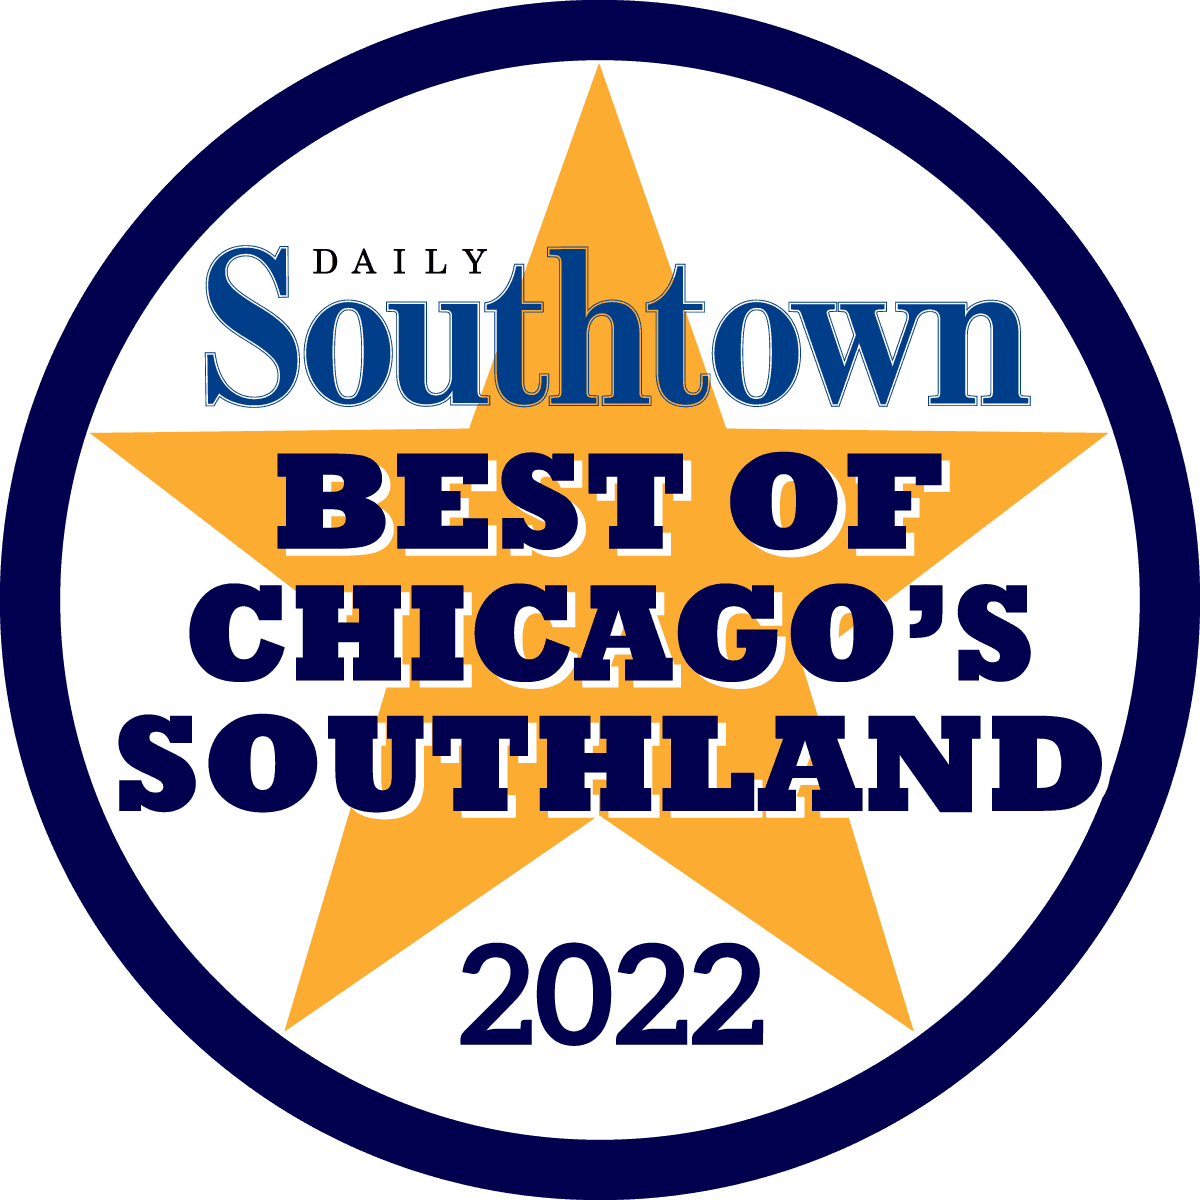 Best of Southland 2022 award